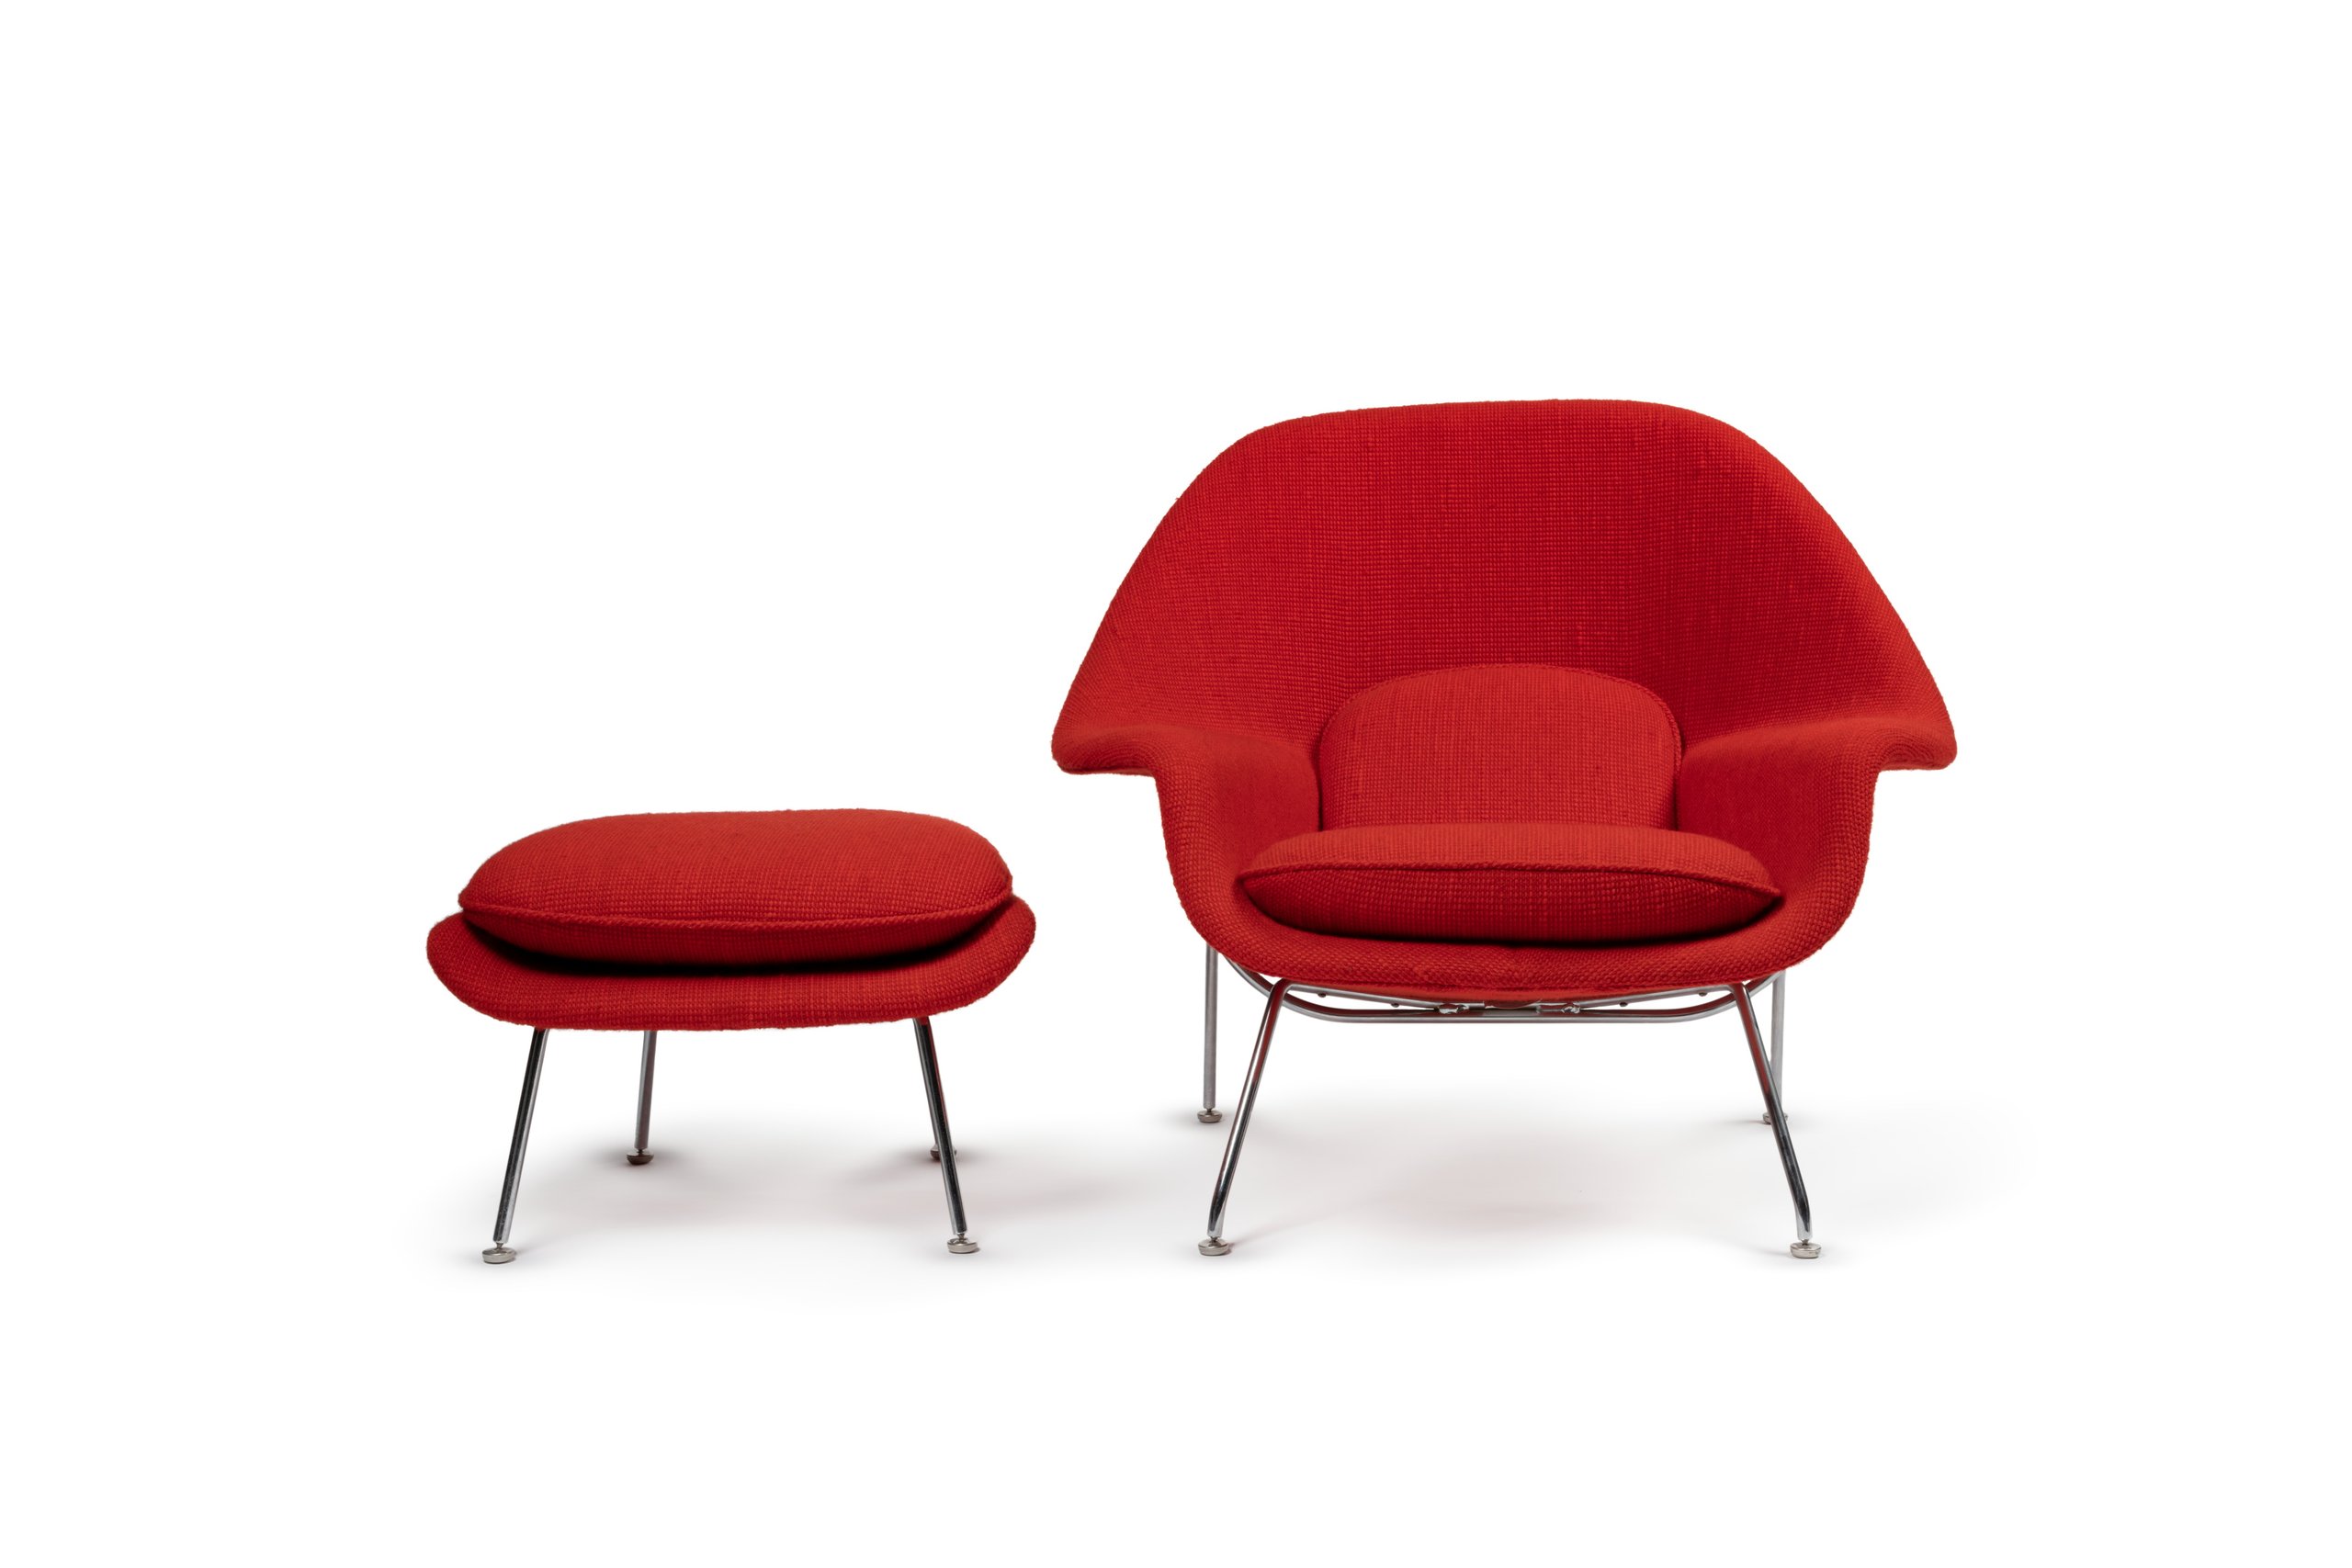 Armchair and footstool designed by Earo Saarinen for M Knoll International